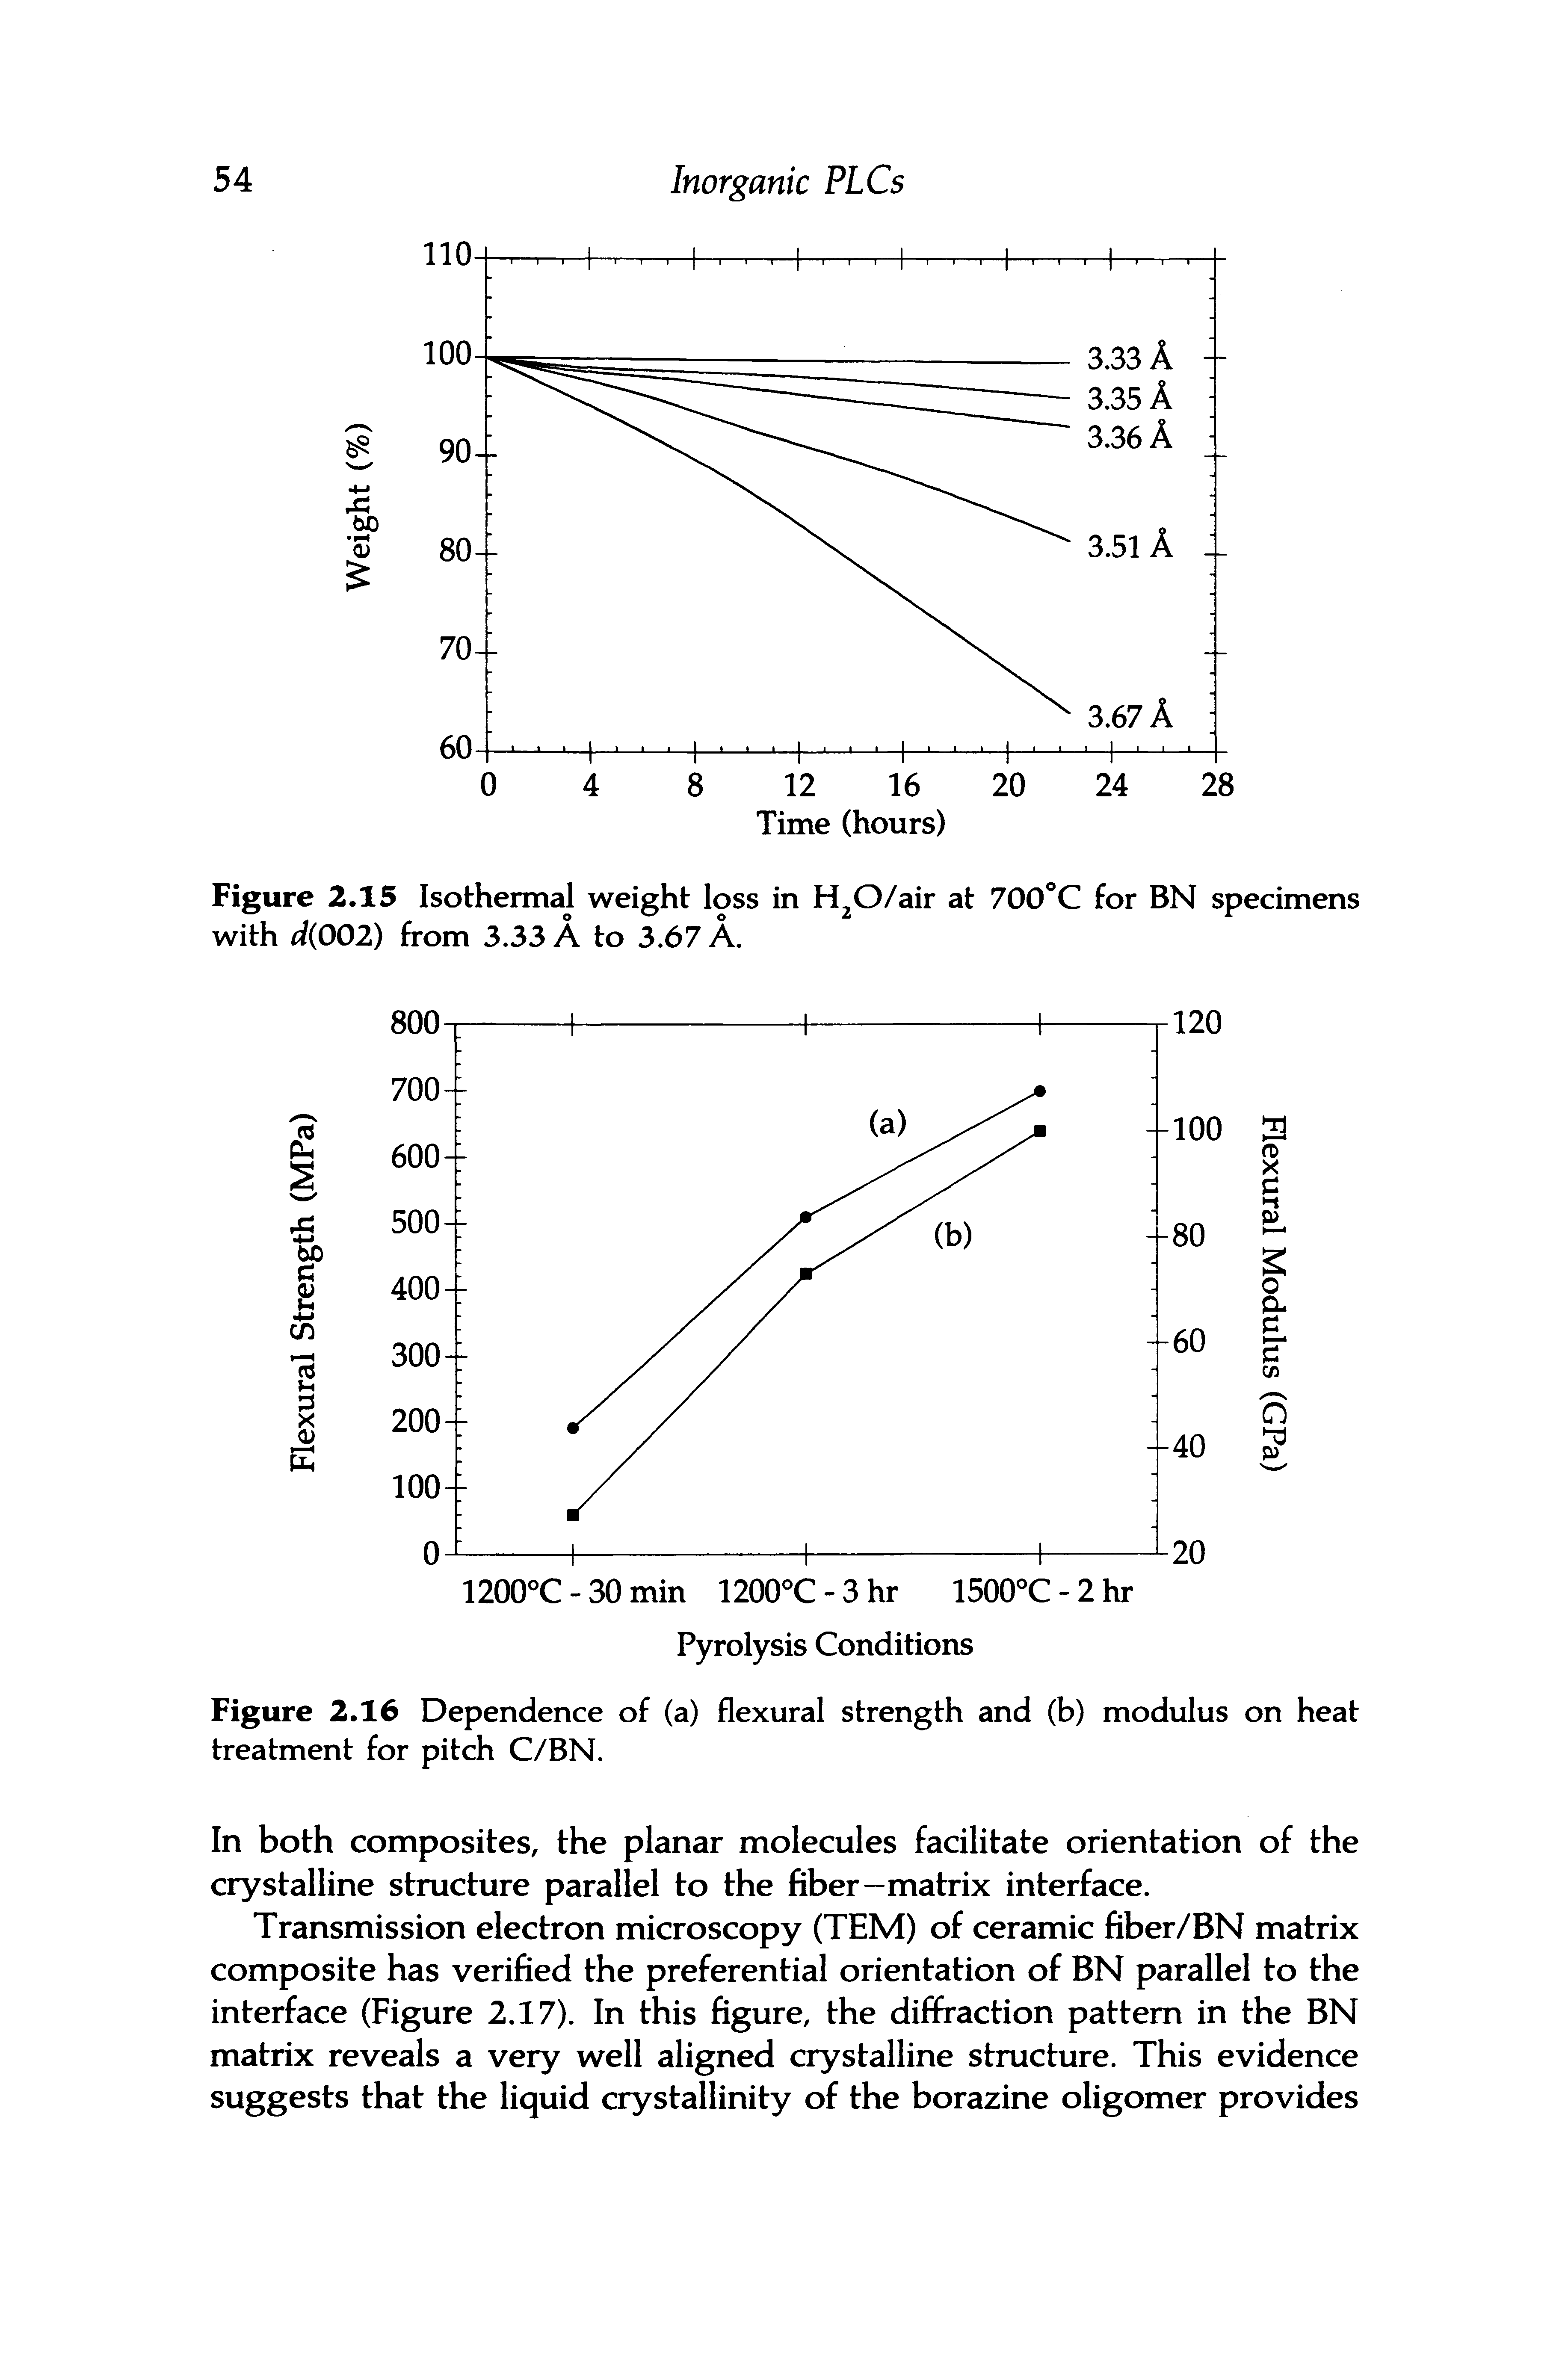 Figure 2.15 Isothermal weight loss in H O/air at ZOO C for BN specimens with d 002) from 3.33 A to 3.67 A.